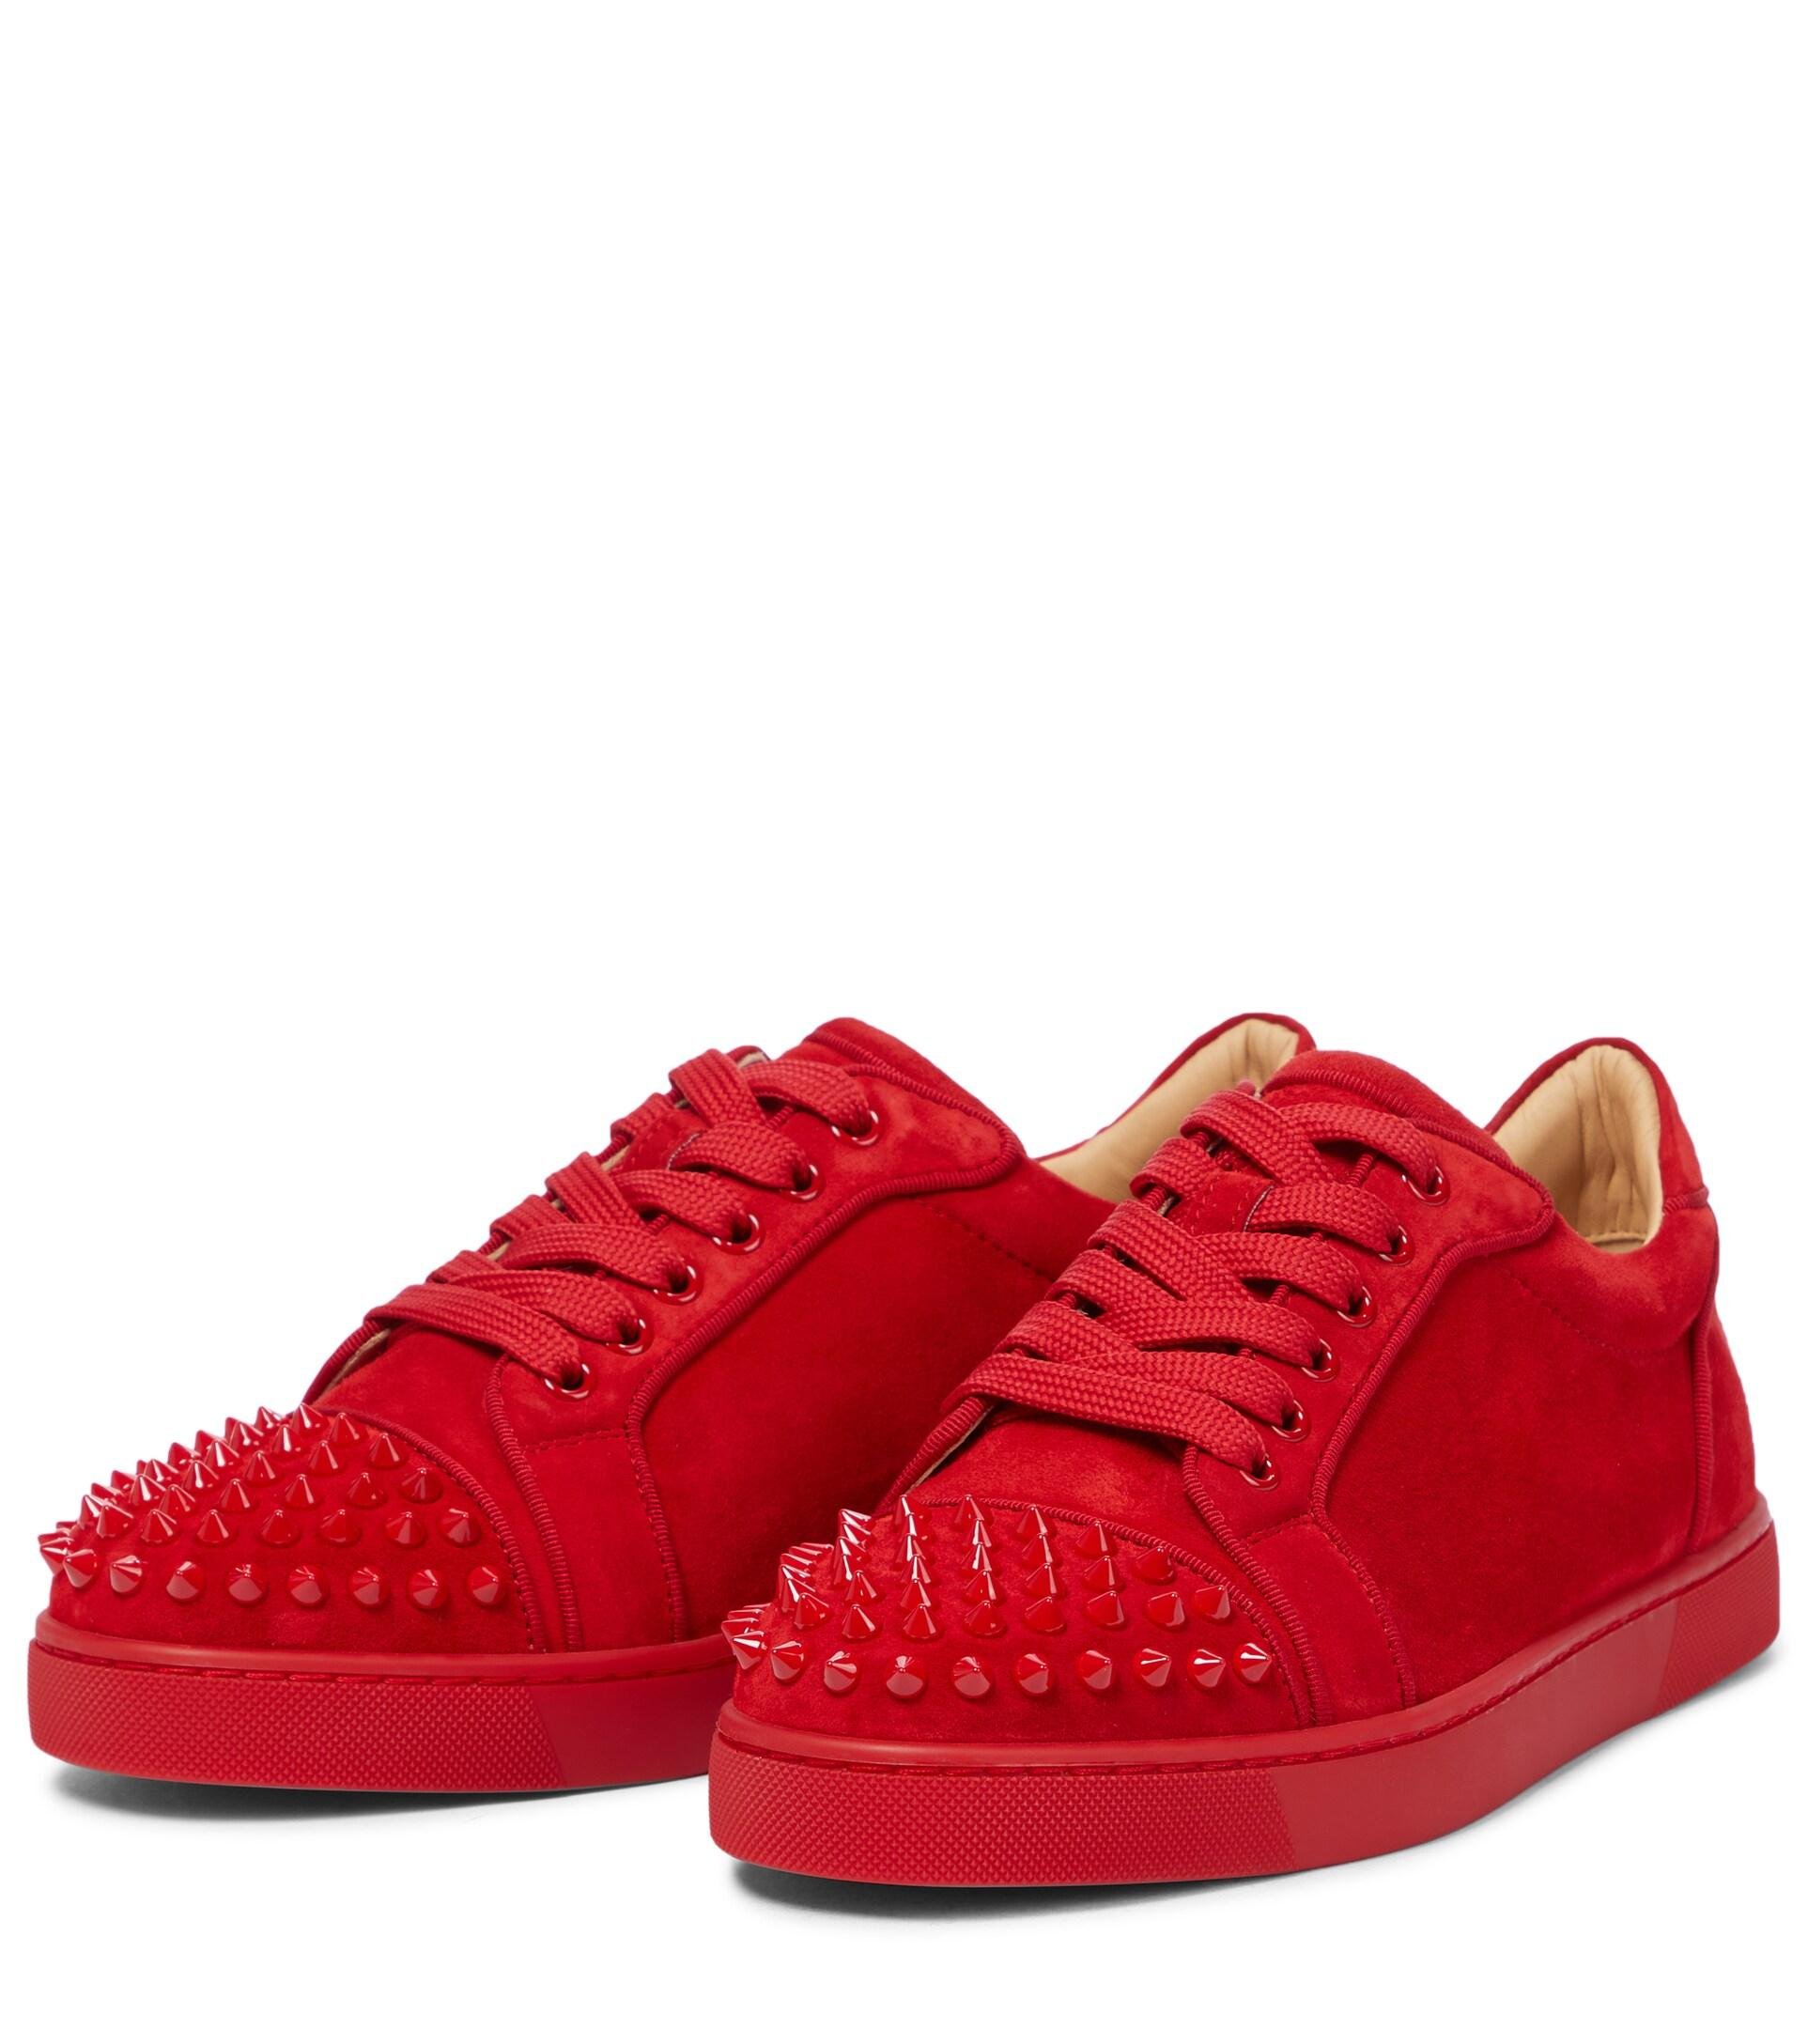 Christian Louboutin Vieira Spikes Suede Sneakers Red Lyst